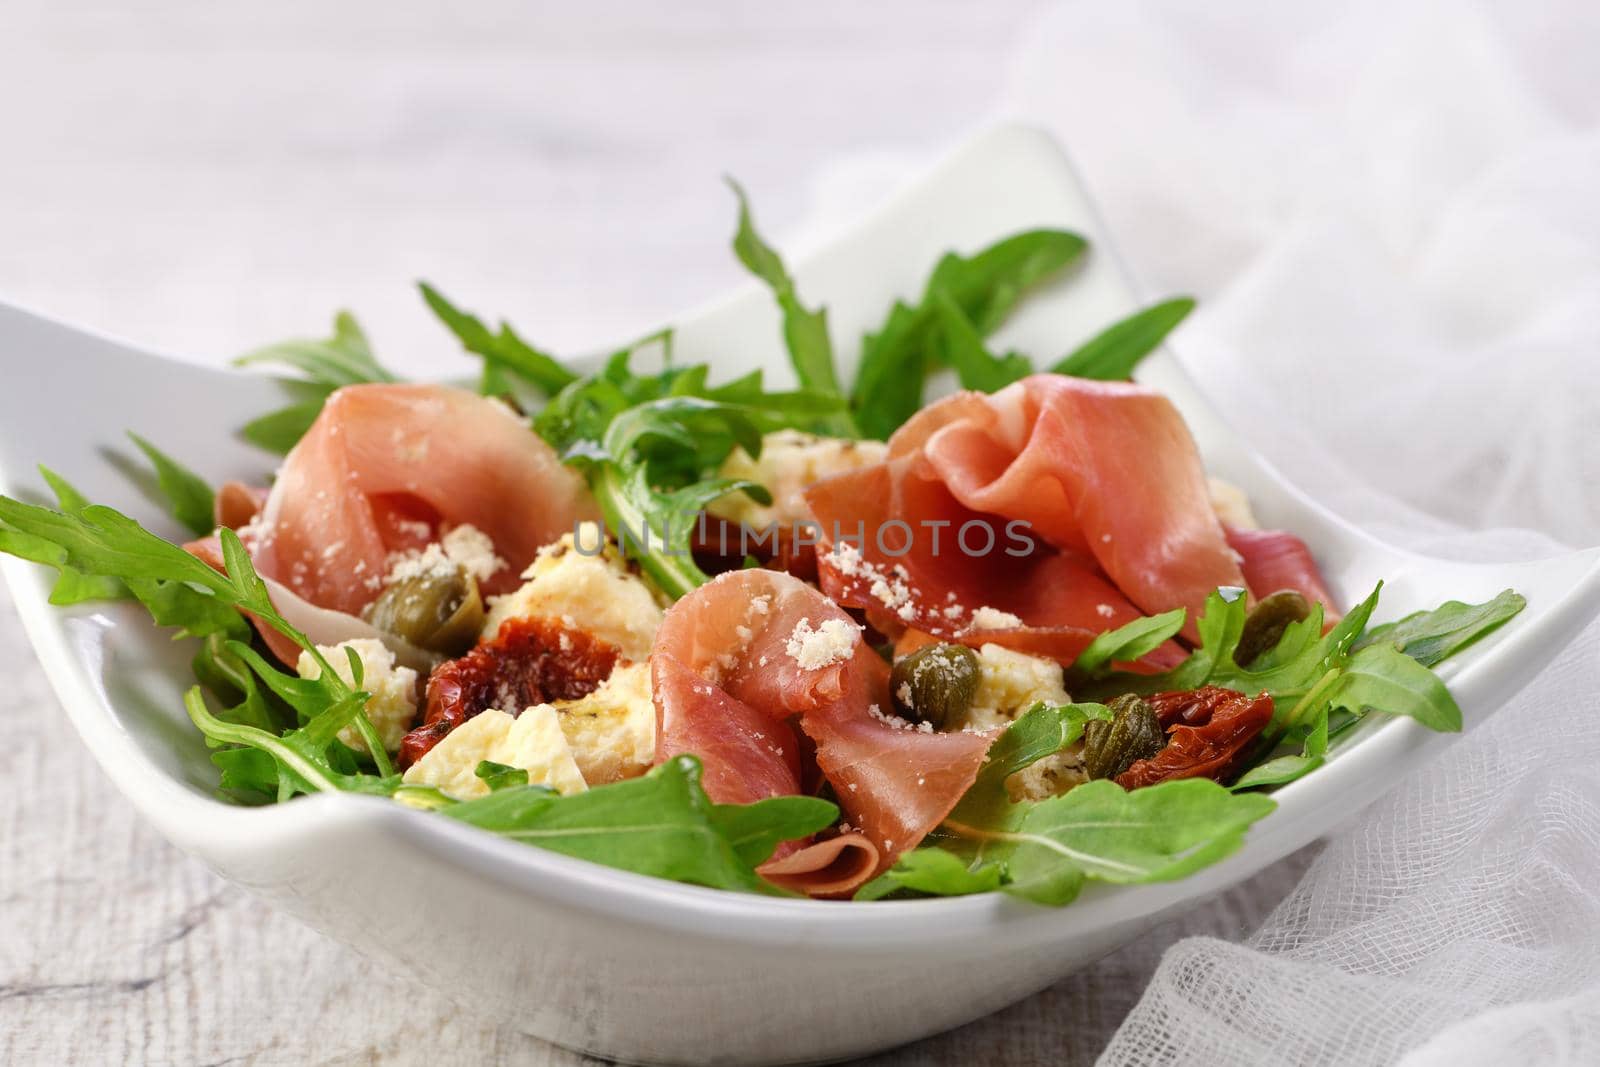 Arugula salad, prosciutto with sun-dried tomatoes by Apolonia